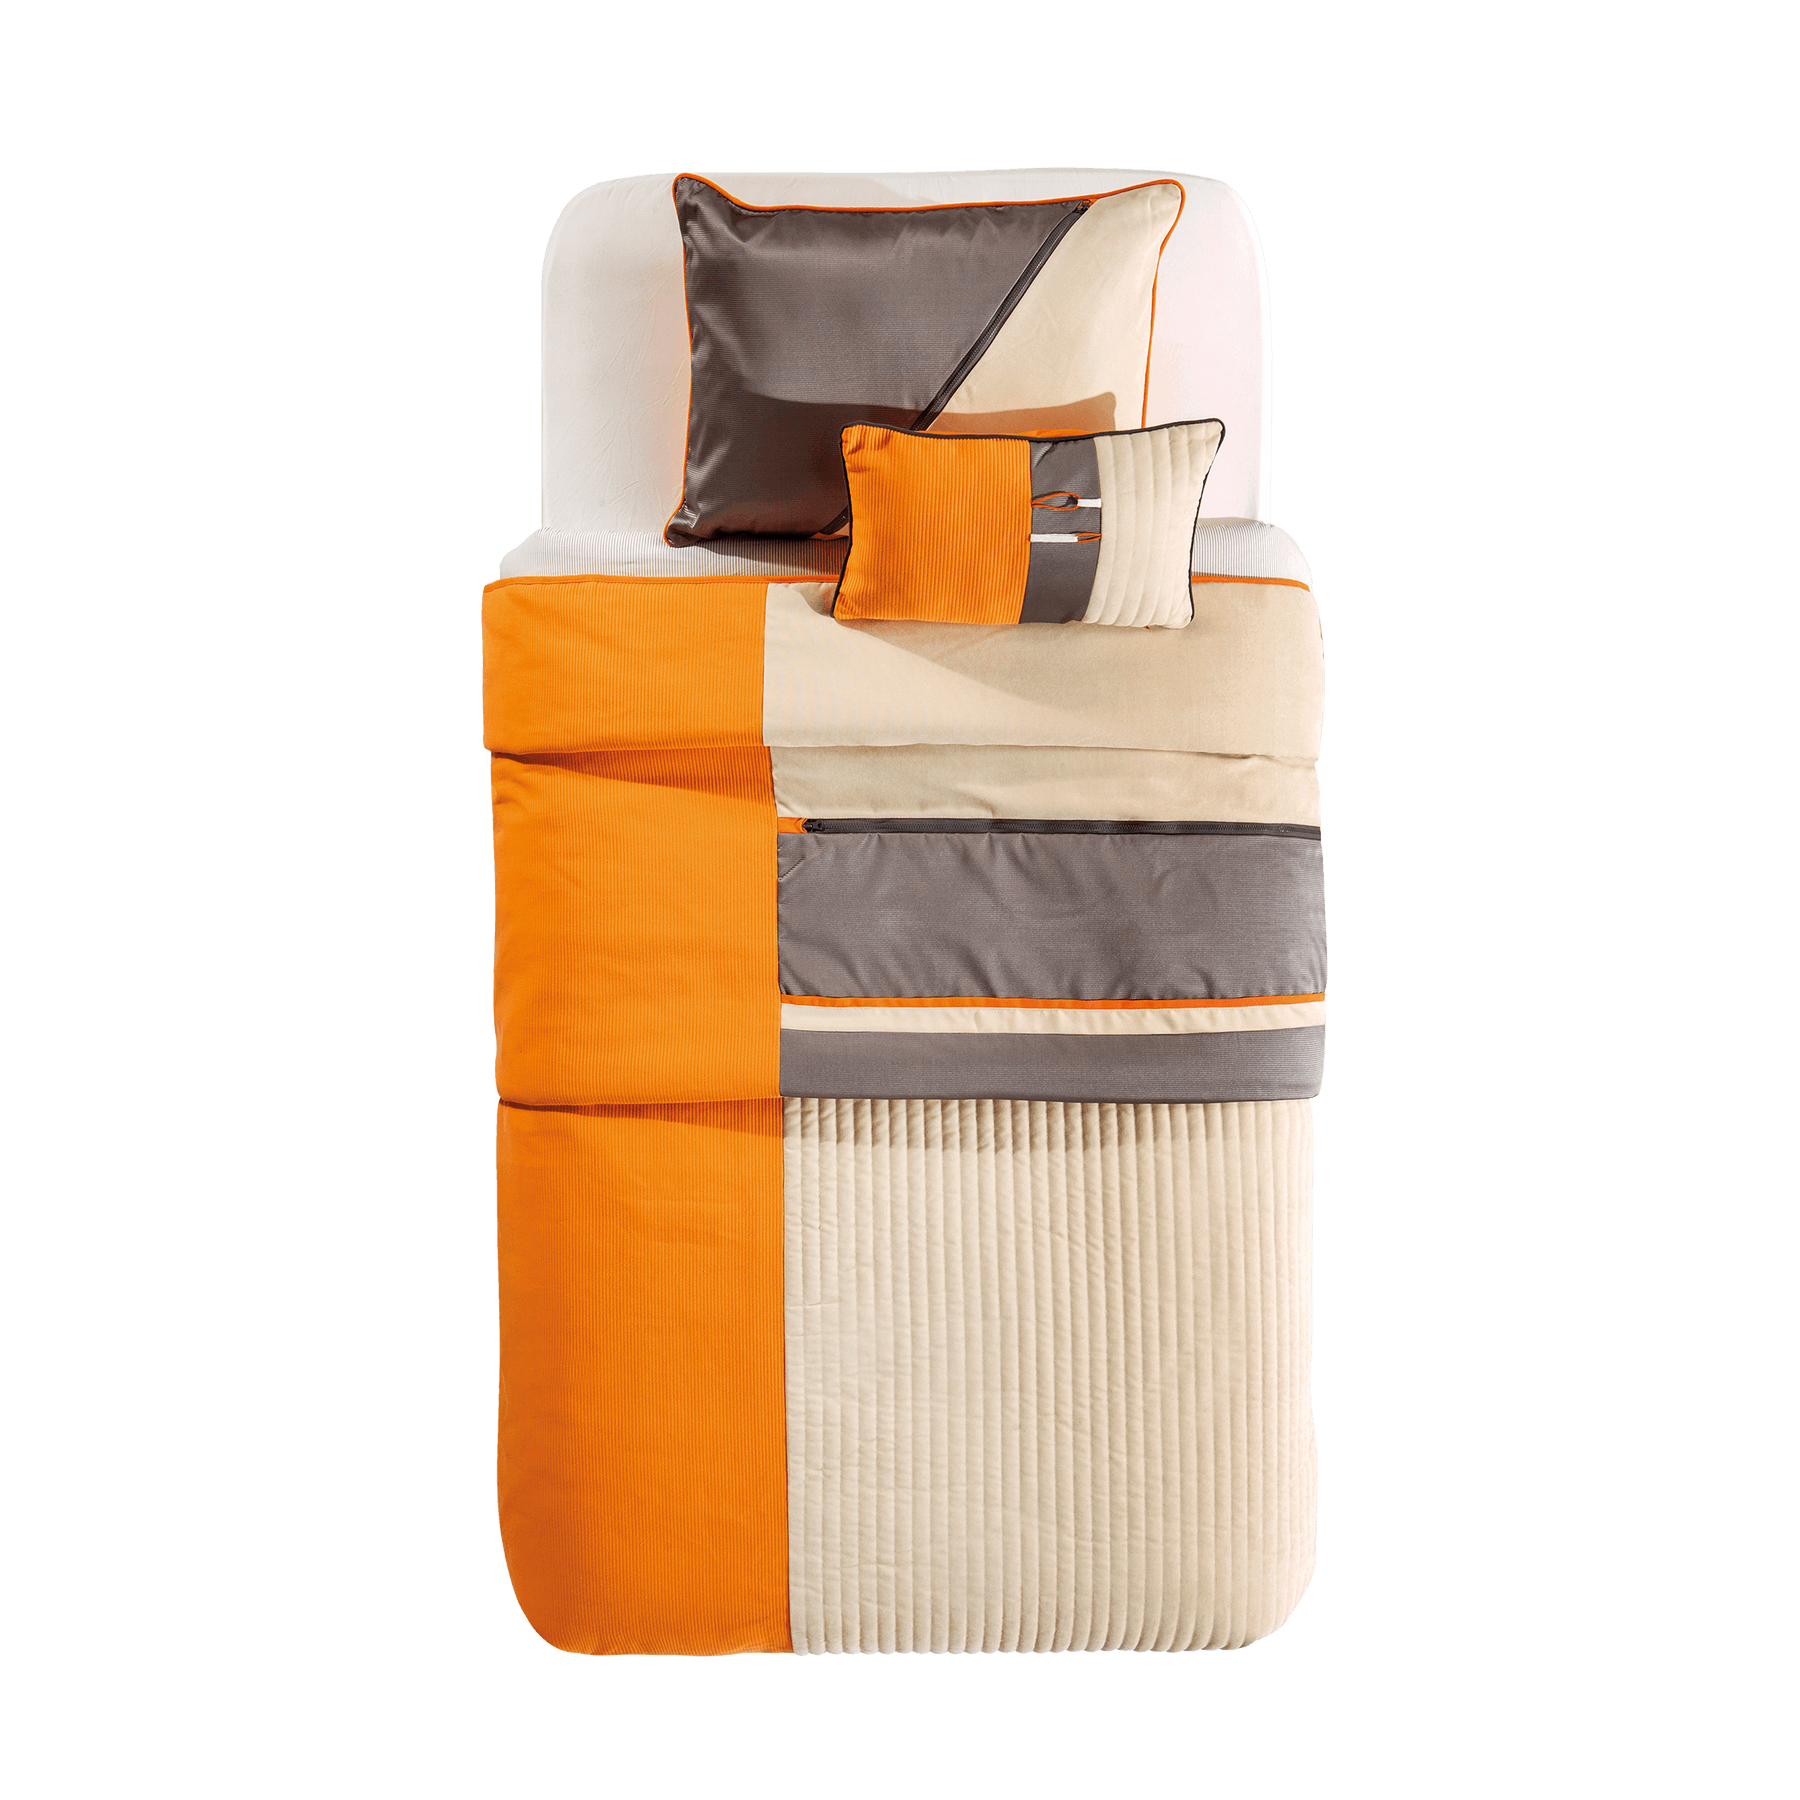 Cilek Energy Bed Cover (90-100 Cm Or 120 Cm) - Kids Haven